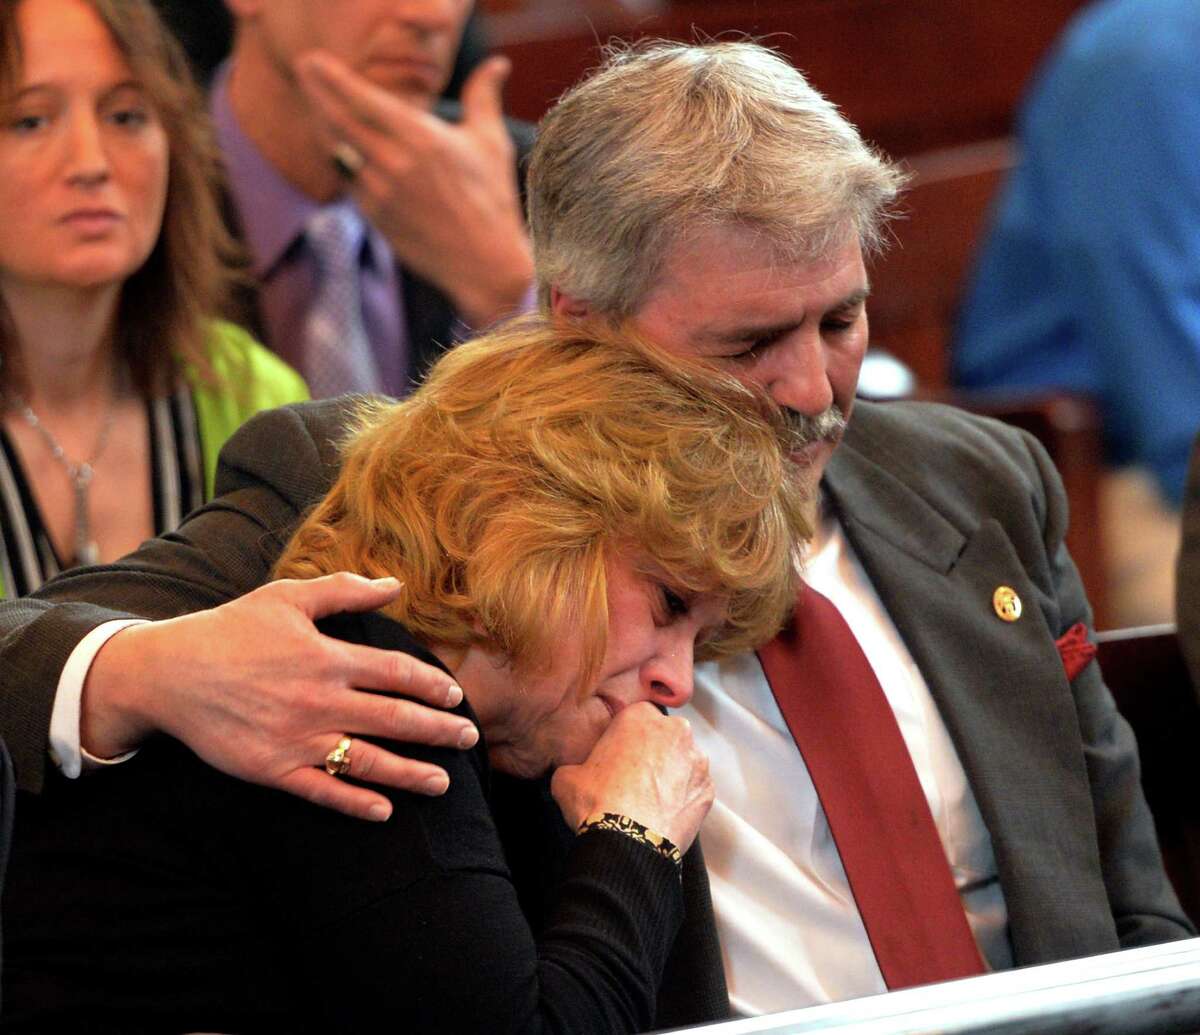 Mark Fusco's mother and father, Kim and Rick Fusco support each other during their son Mark's sentencing on charges of vehicular manslaughter Friday April 11, 2014 in Rensselaer County Court in Troy, N.Y. Fusco admitted to driving drunk and killing Sean Murphy. (Skip Dickstein / Times Union)